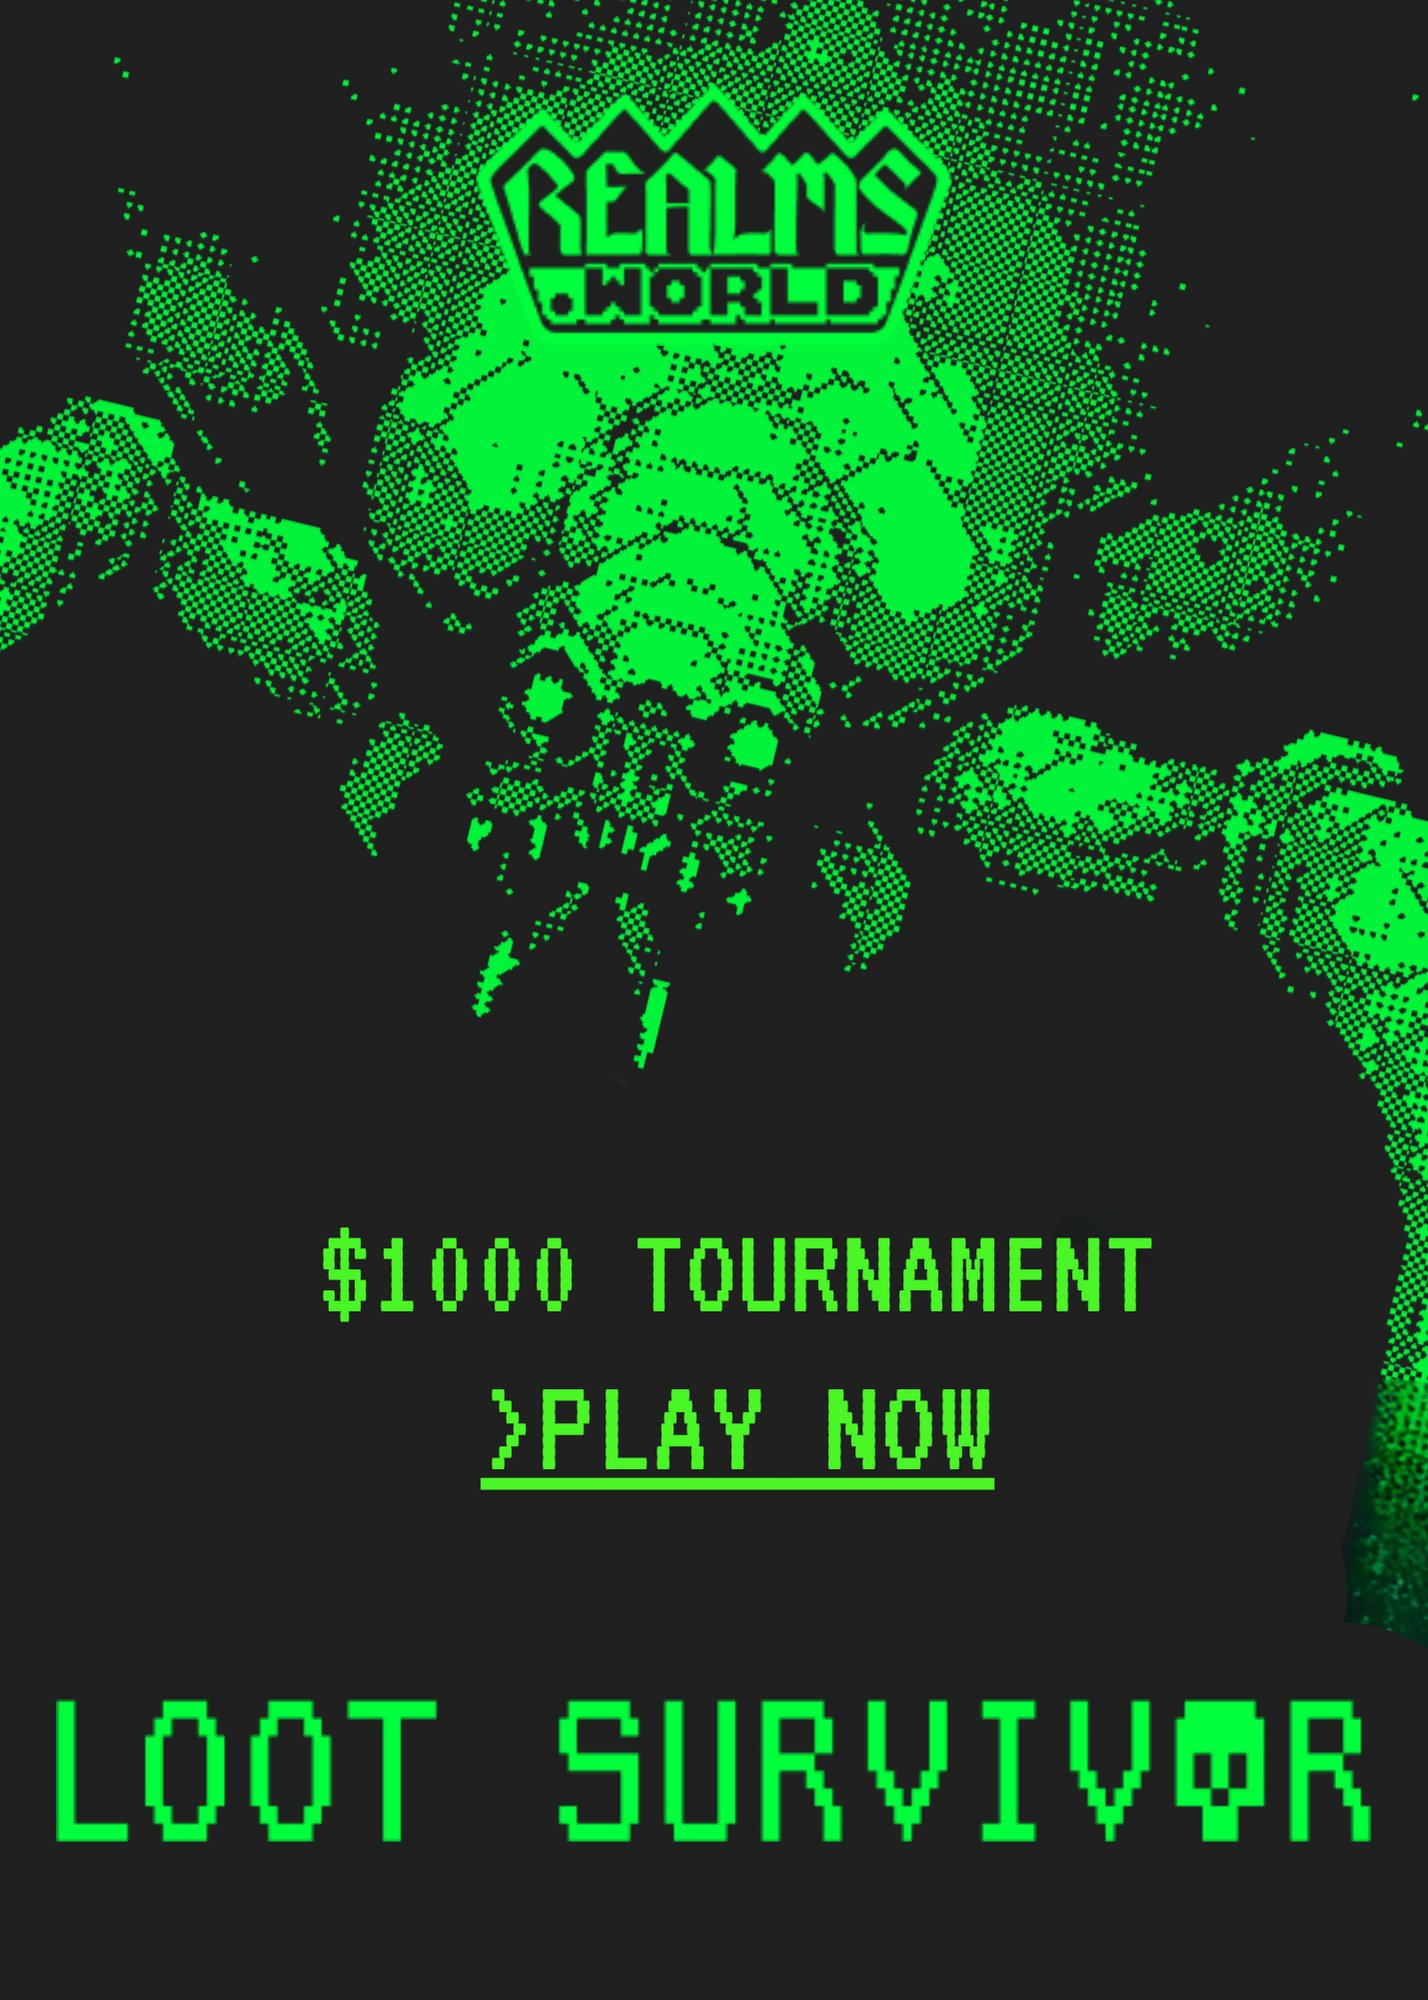 The awesome looking poster for the Loot Survivor tournament.